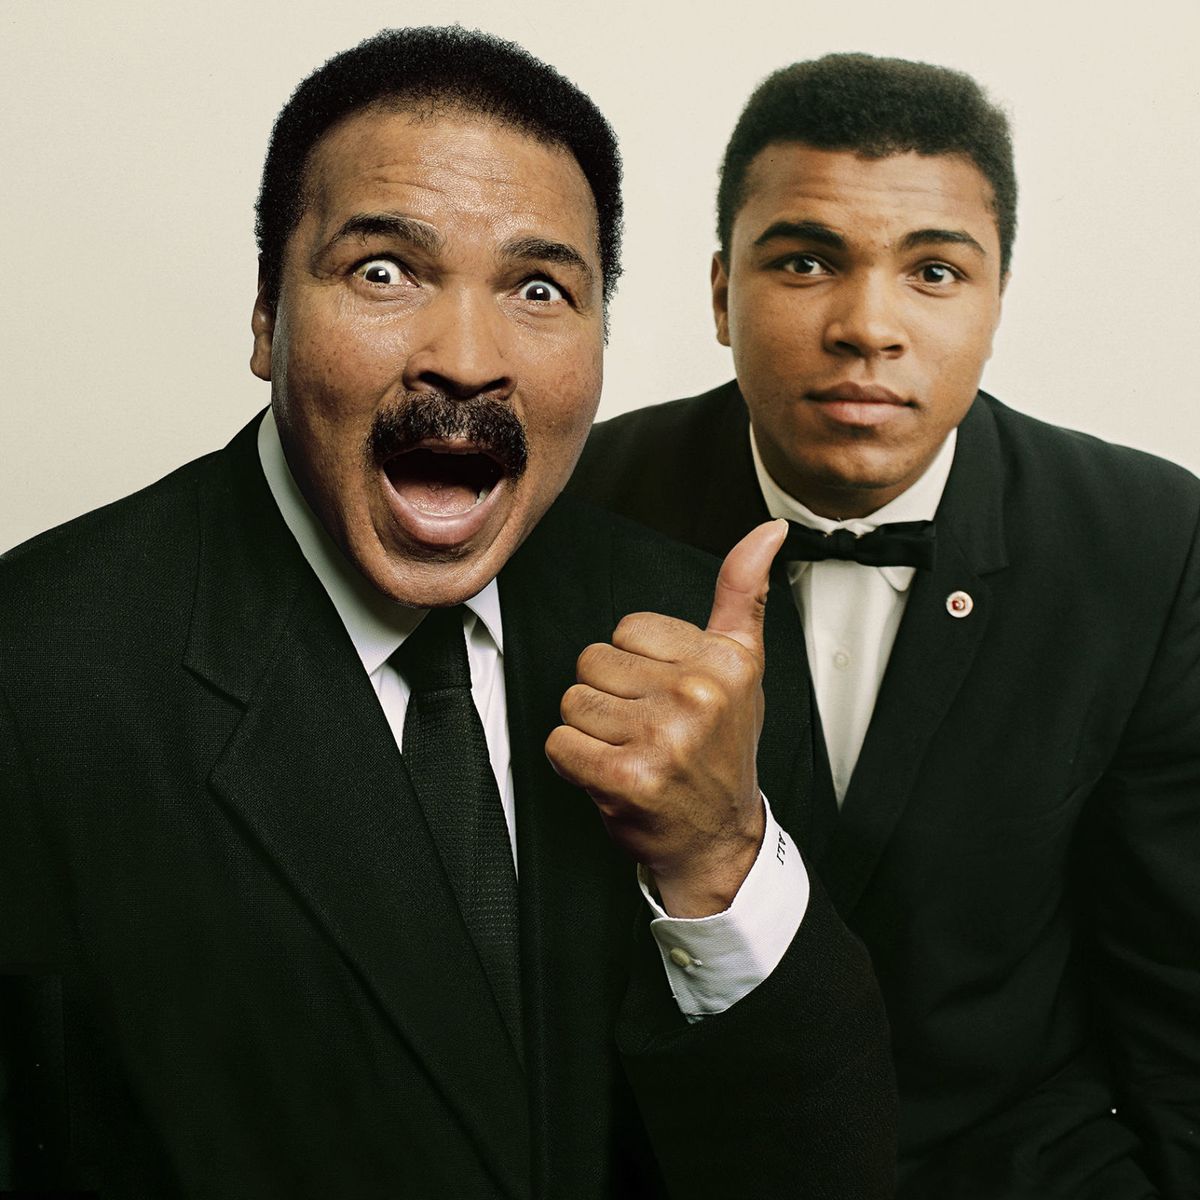 Astounding Bursts of Physical Brilliance - Interview with Muhammad Ali